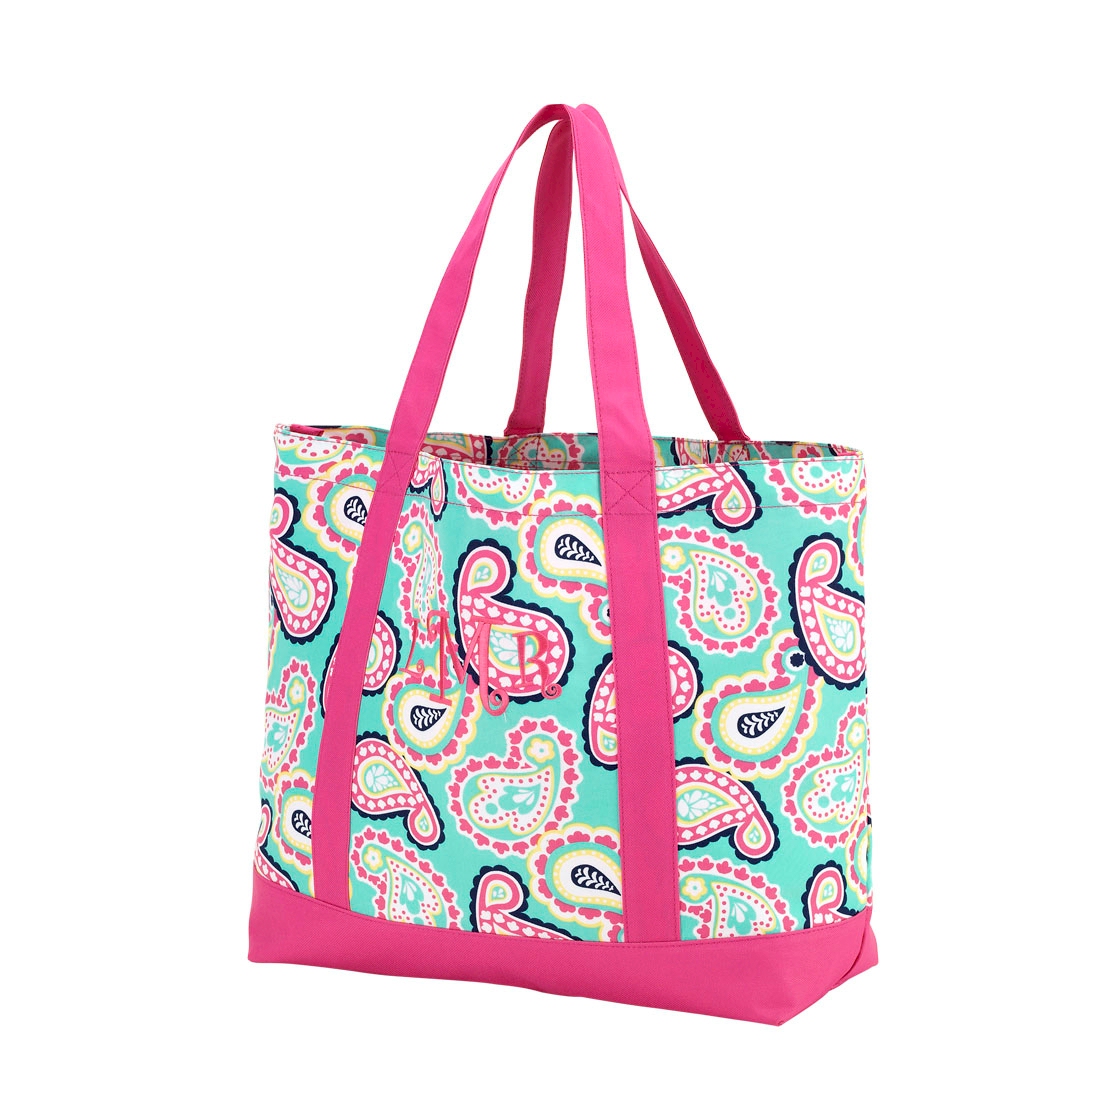 Paisley Tote Bag Embroidery Blanks - CLOSEOUT